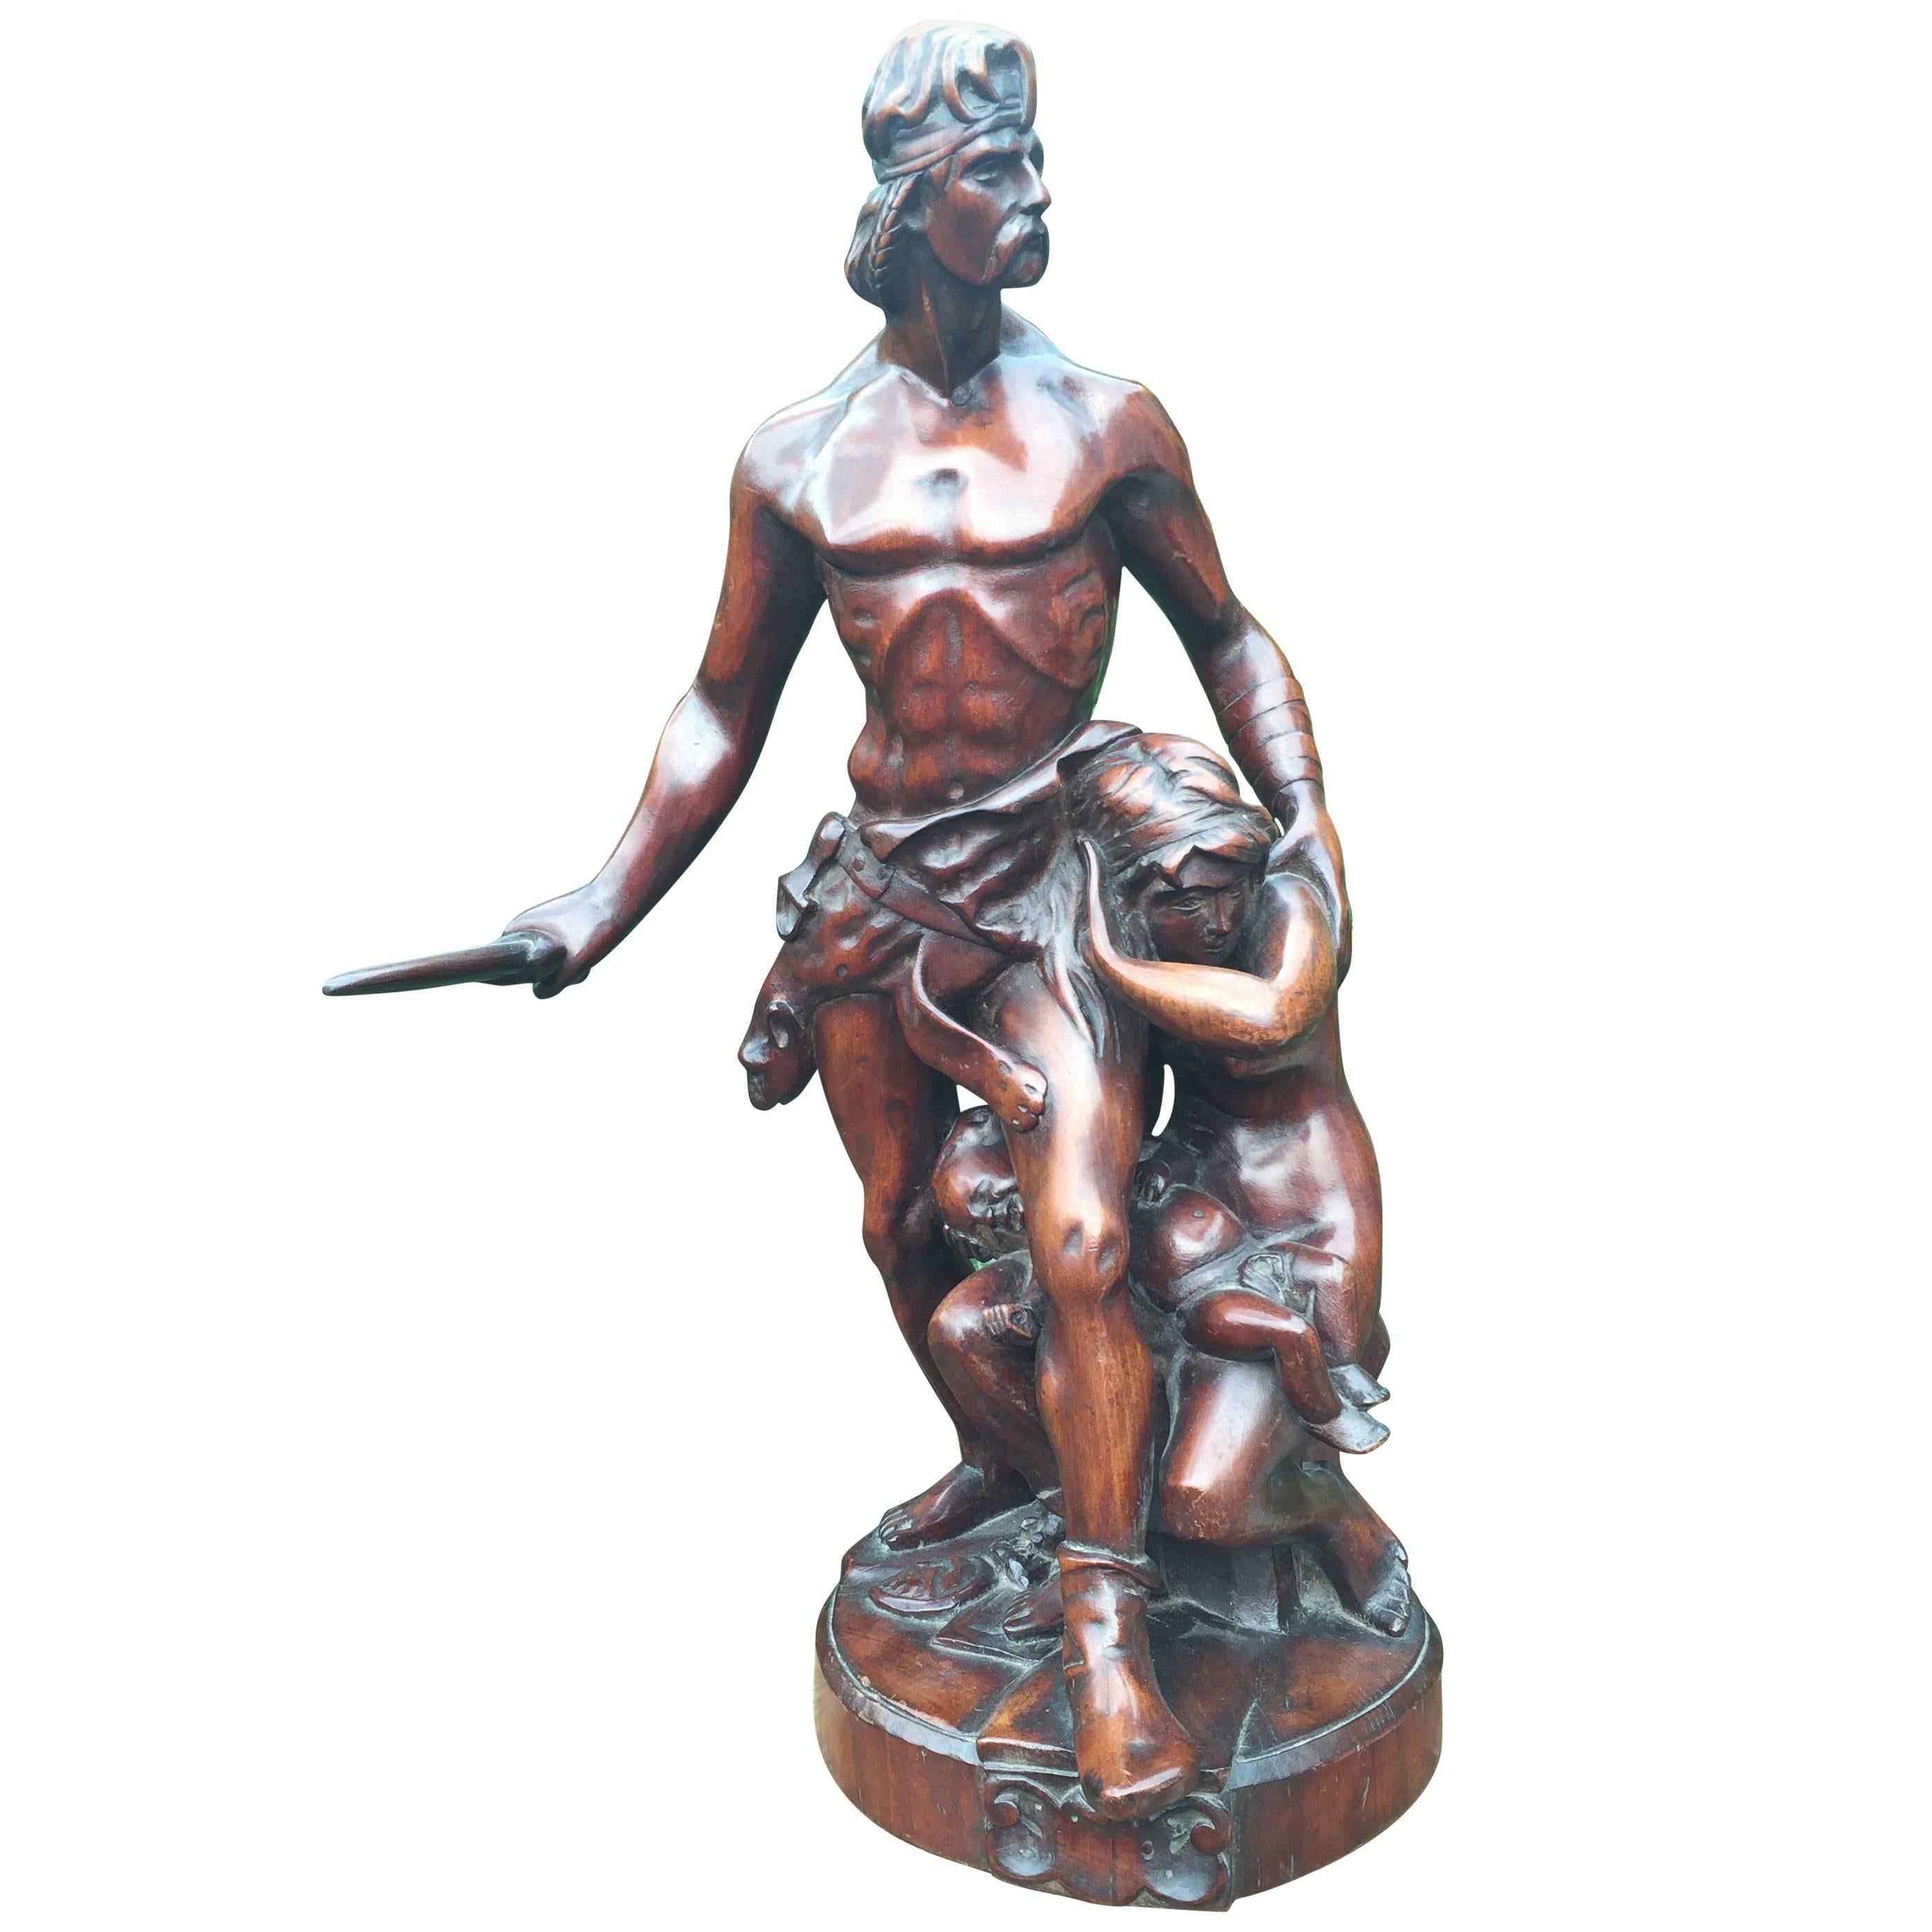 One of a Kind Antique Carved Wood Group Statue Sculpture by Emile Boisseau For Sale